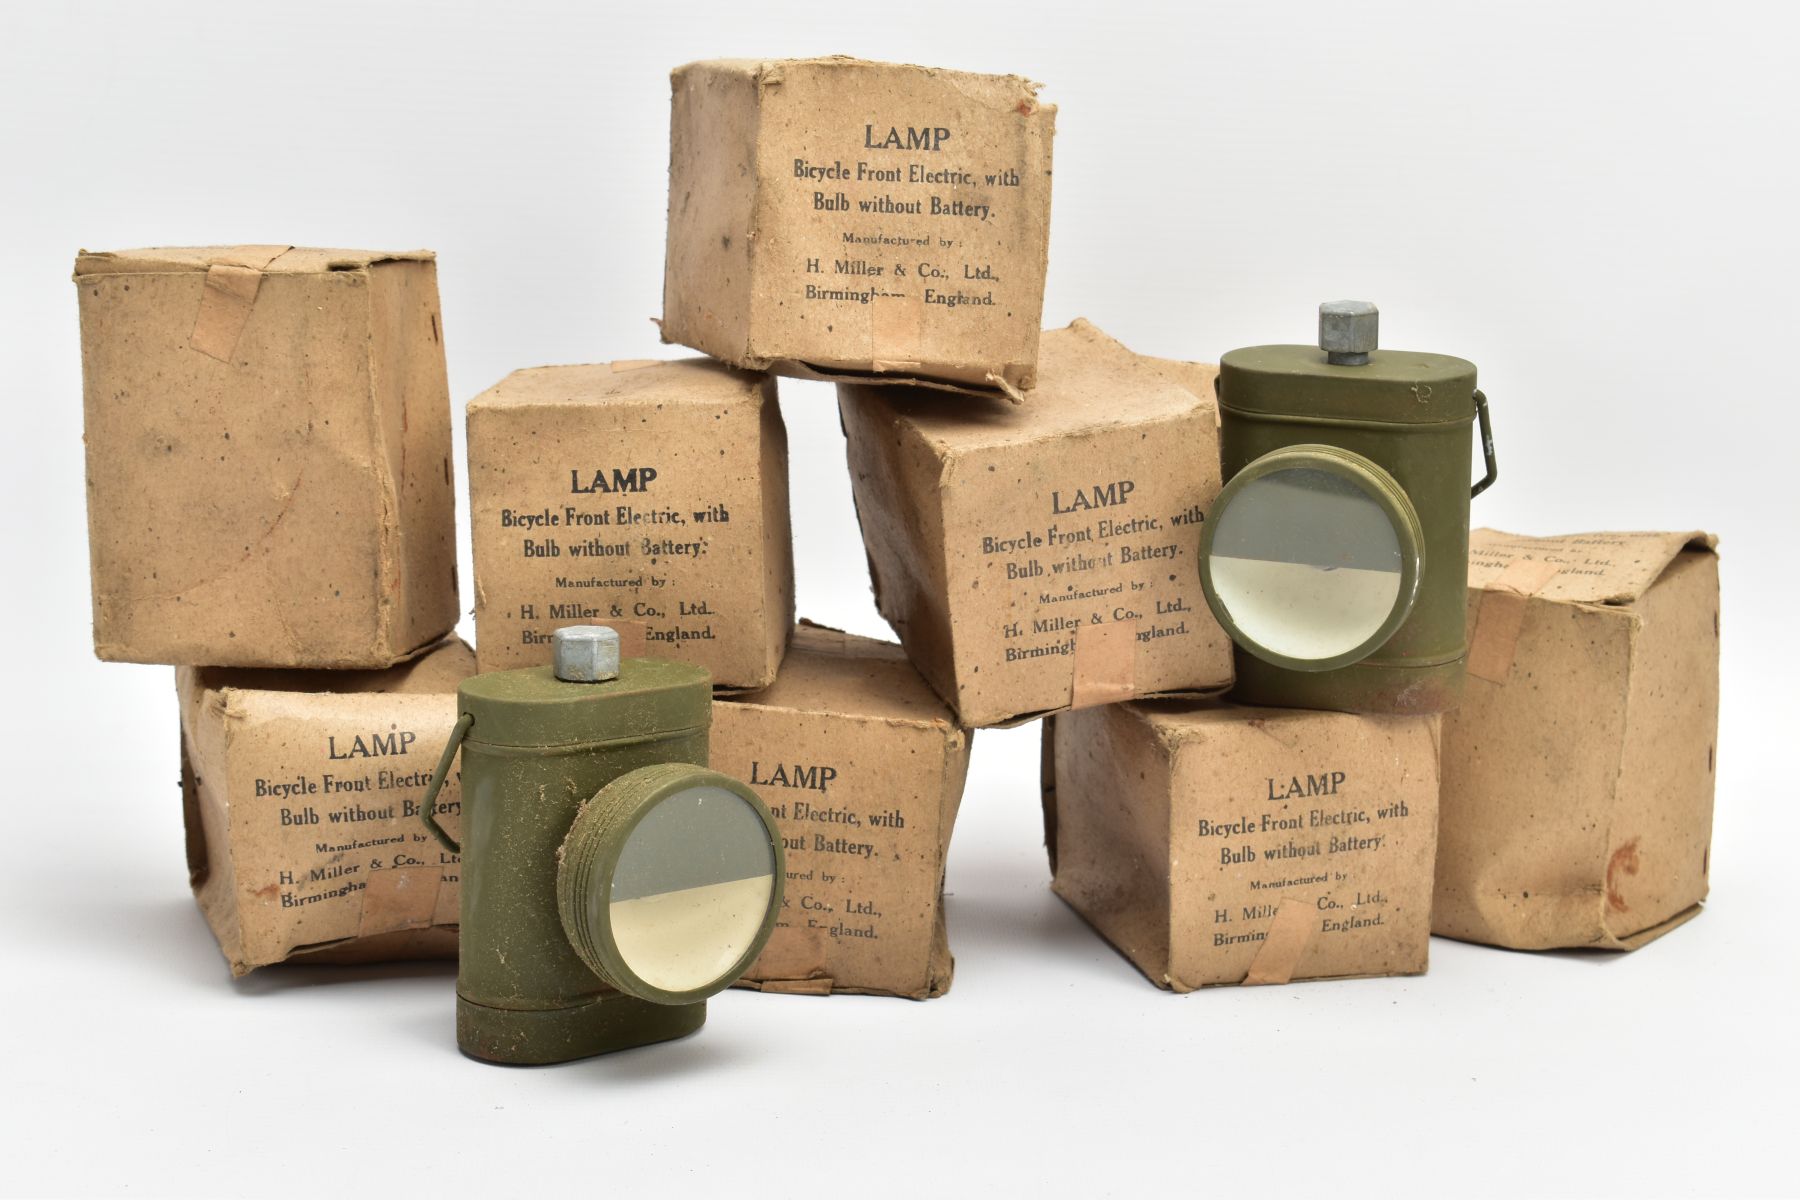 BOX CONTAINING TEN WORLD WAR TWO PERIOD Bicycle lamps boxed, new old stock, for use at night where